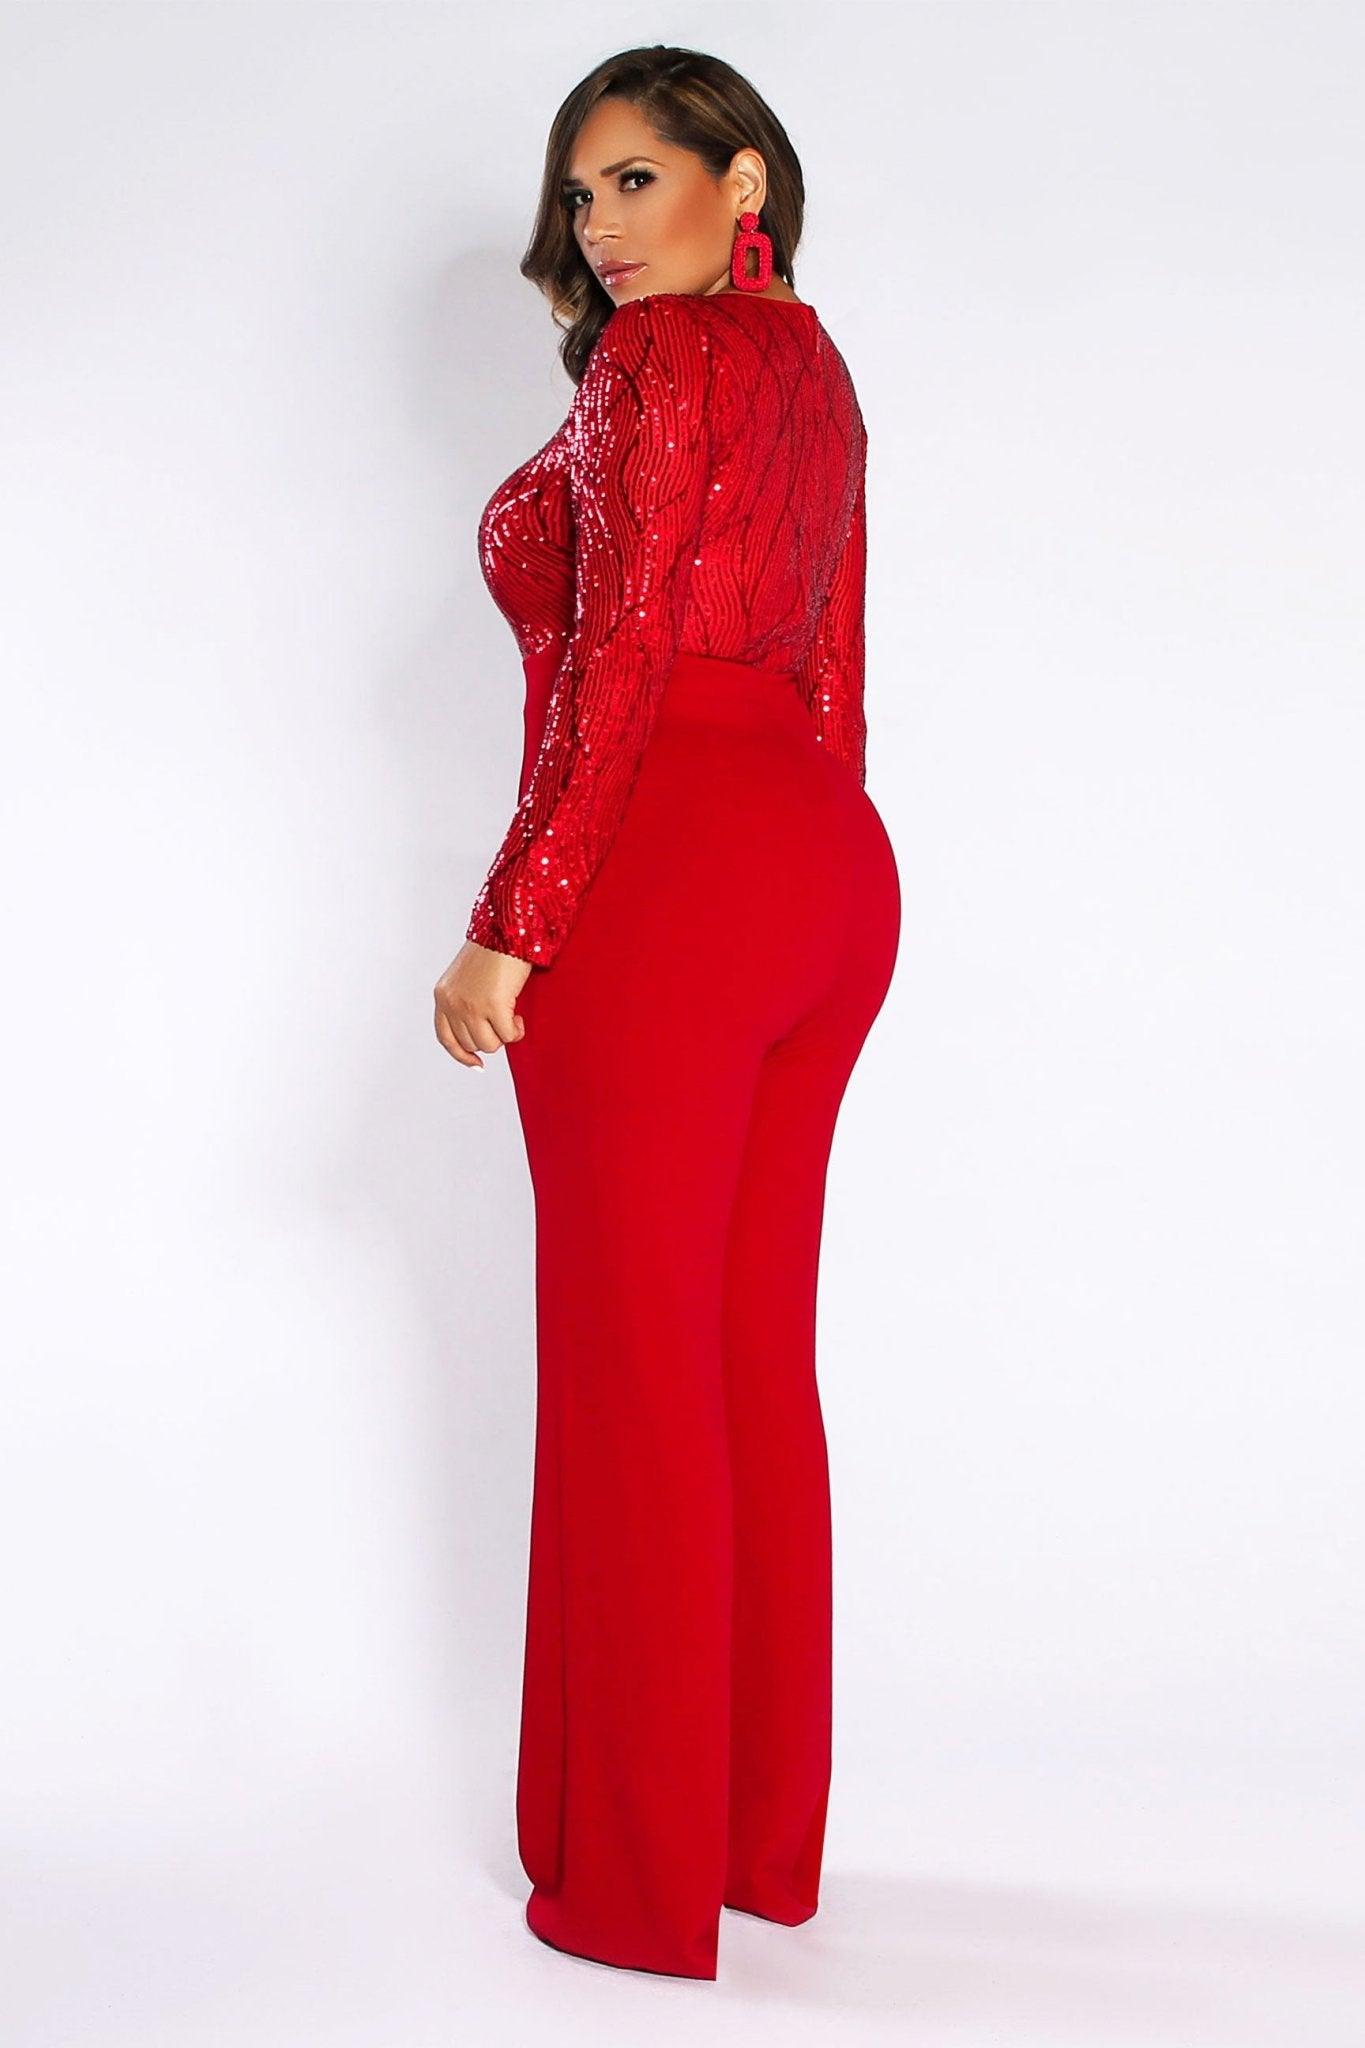 Ellison Gala Sequined Jumpsuit - MY SEXY STYLES